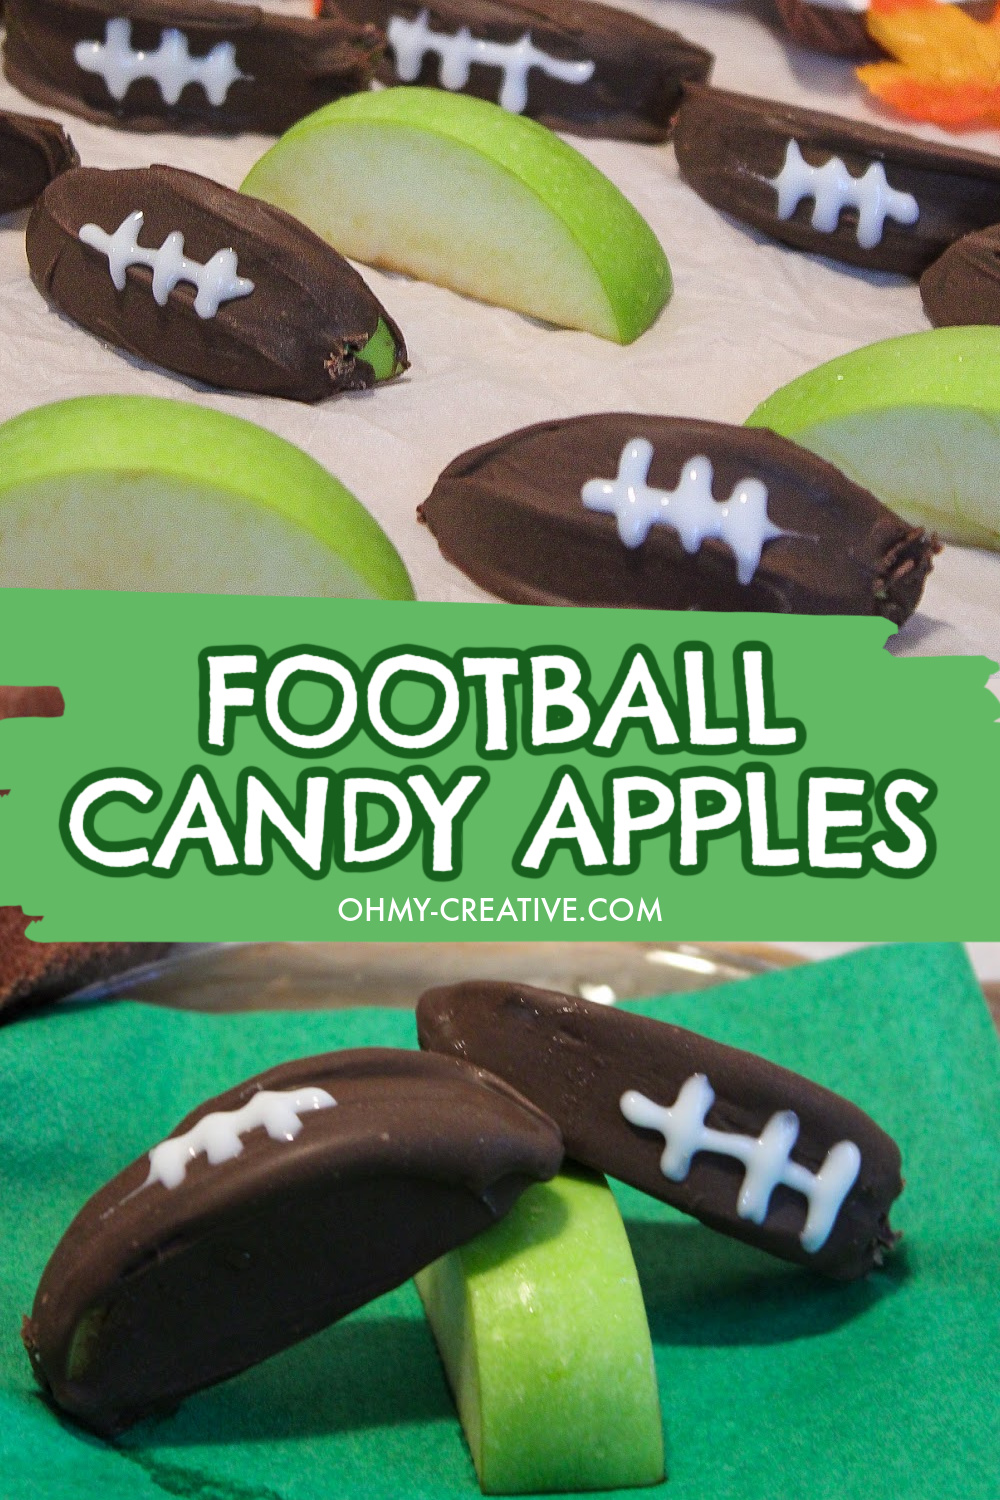 A double pin image showing green sliced apples and chocolate covered apples decorated to look like footballs.